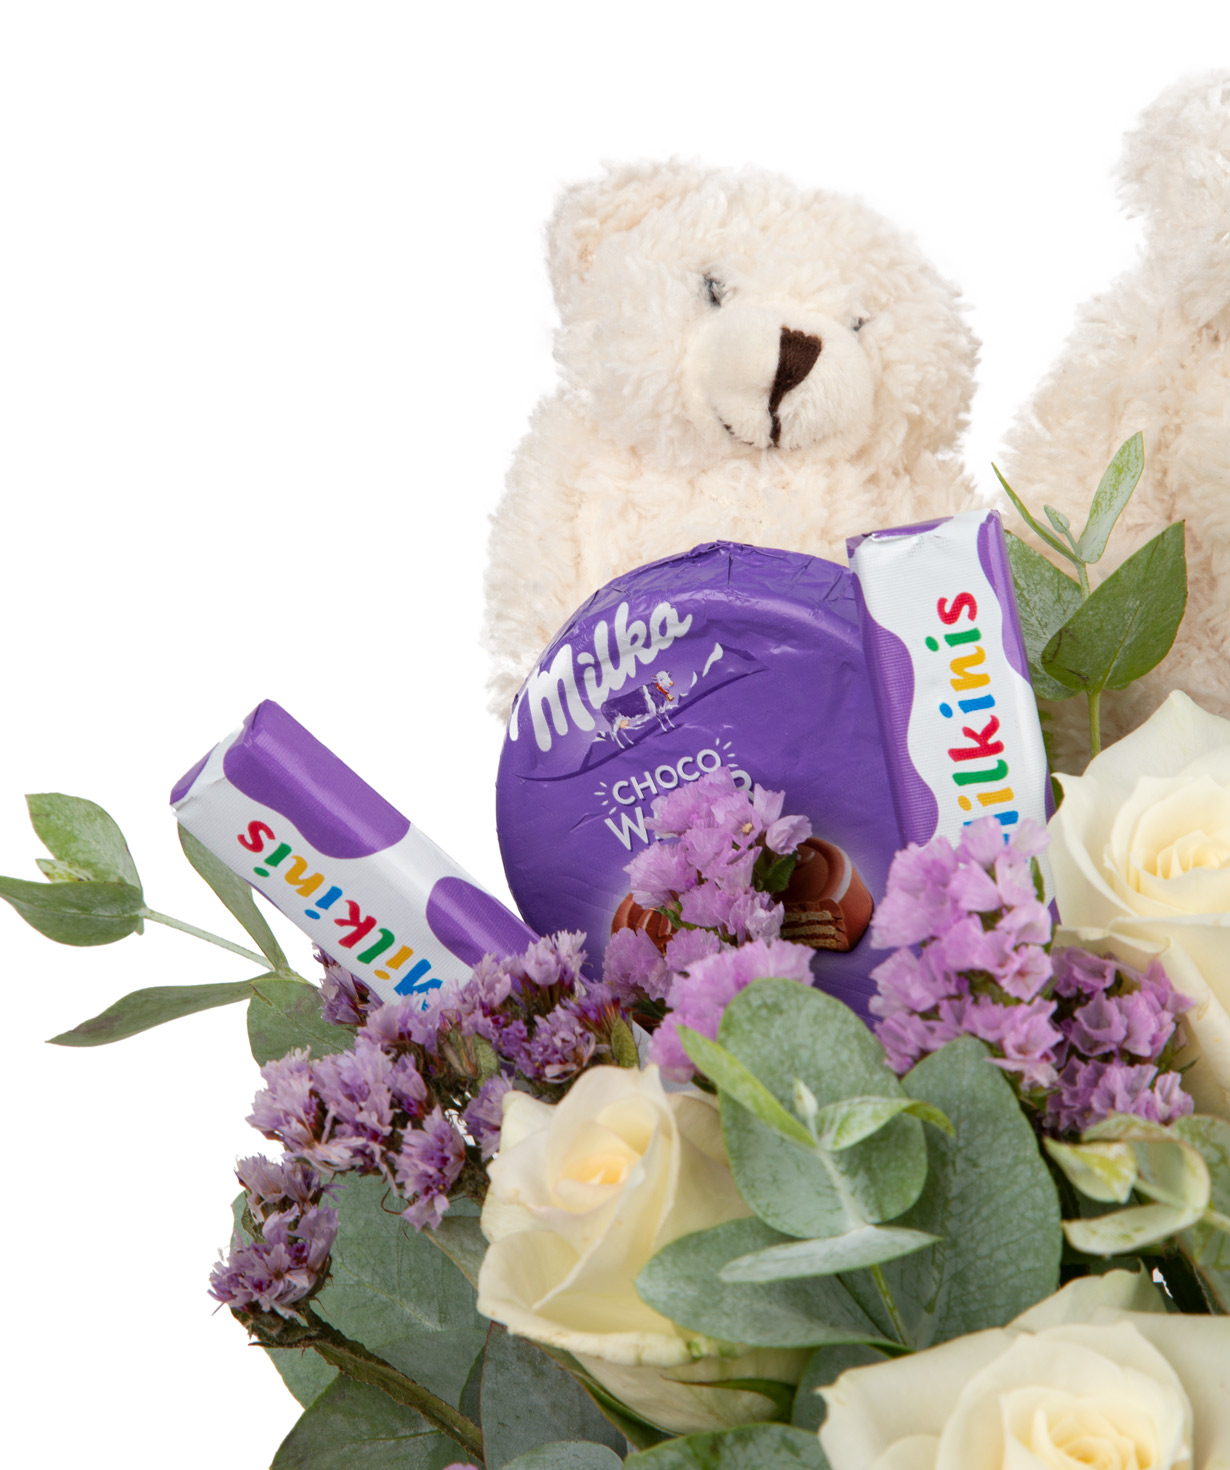 Arrangement `Ratlam` with roses, sweets and soft toy